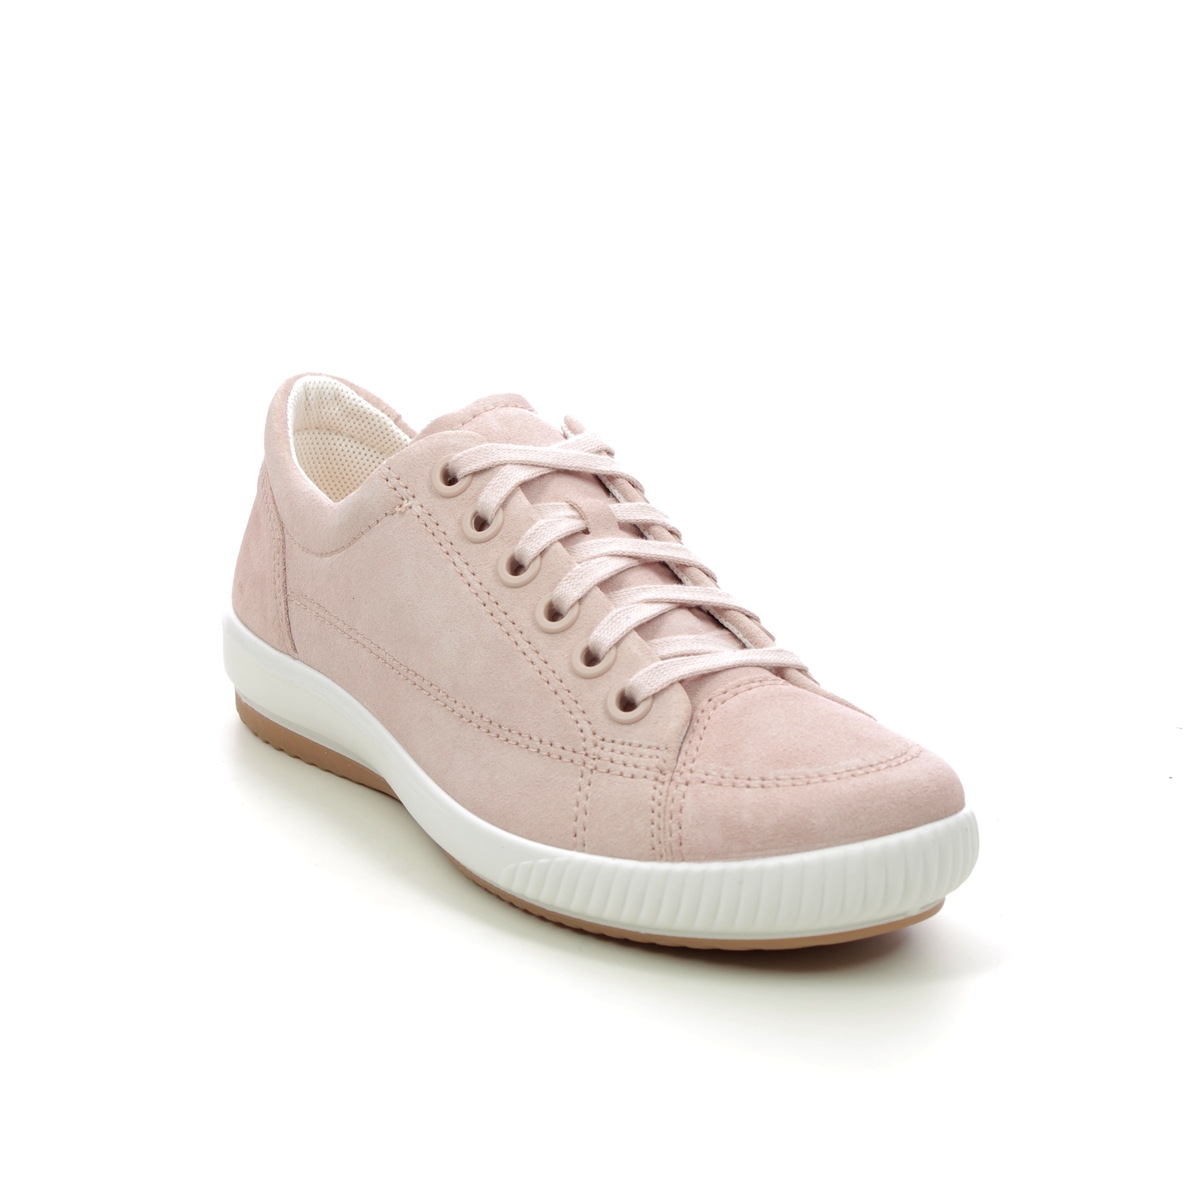 Legero Tanaro 5 Stitch Blush Pink Womens lacing shoes 2000161-4560 in a Plain Leather in Size 4.5